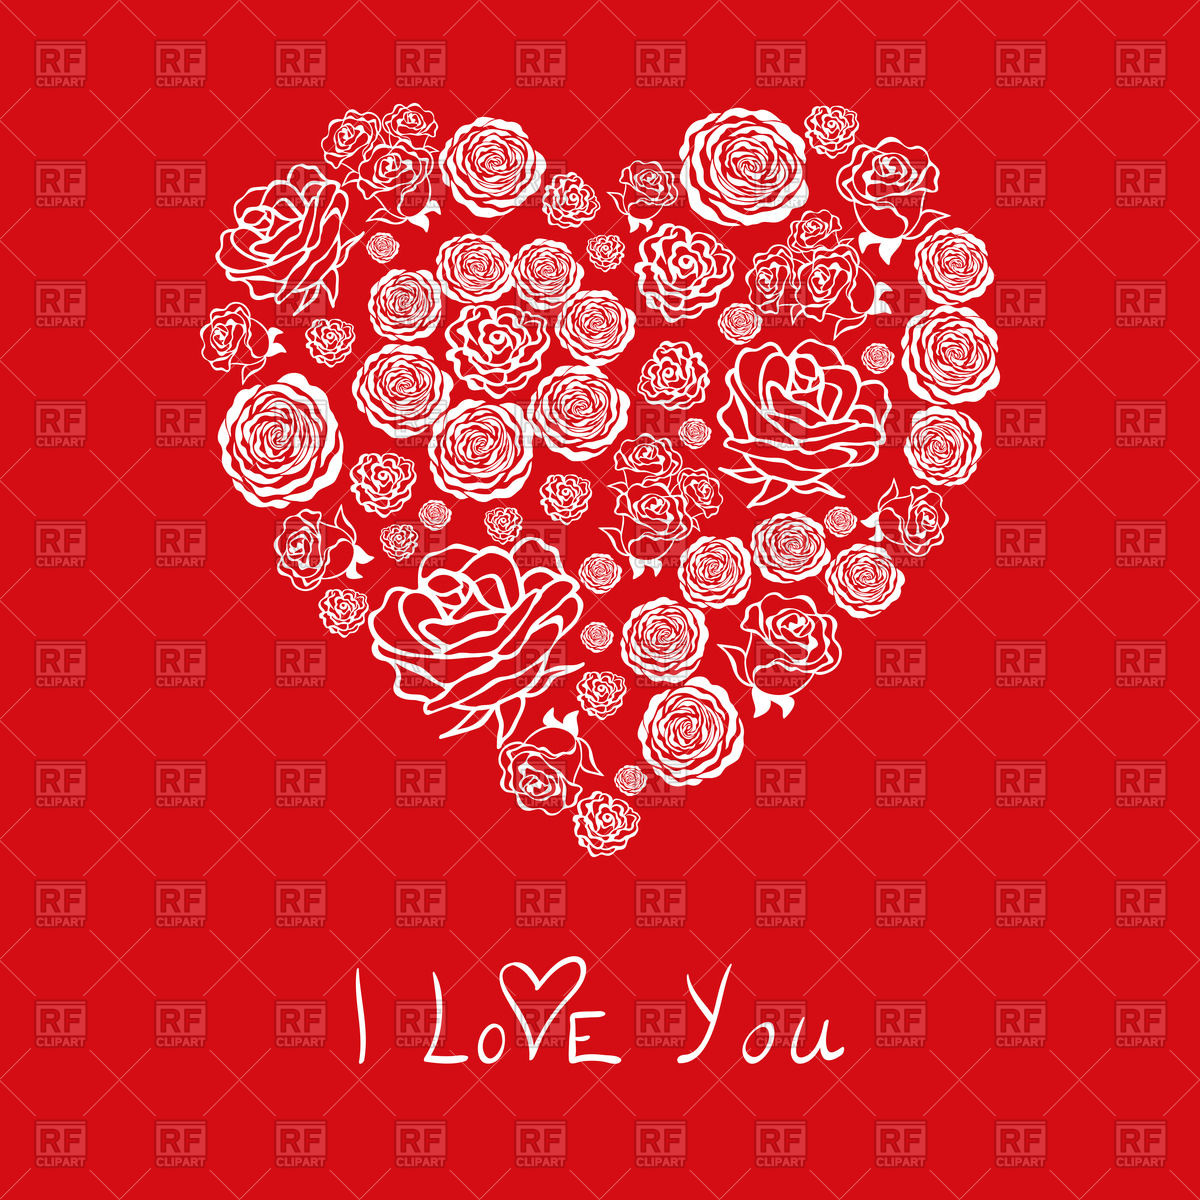 Valentine S Day Card   Heart Shaped Floral Ornament Of Roses 58021